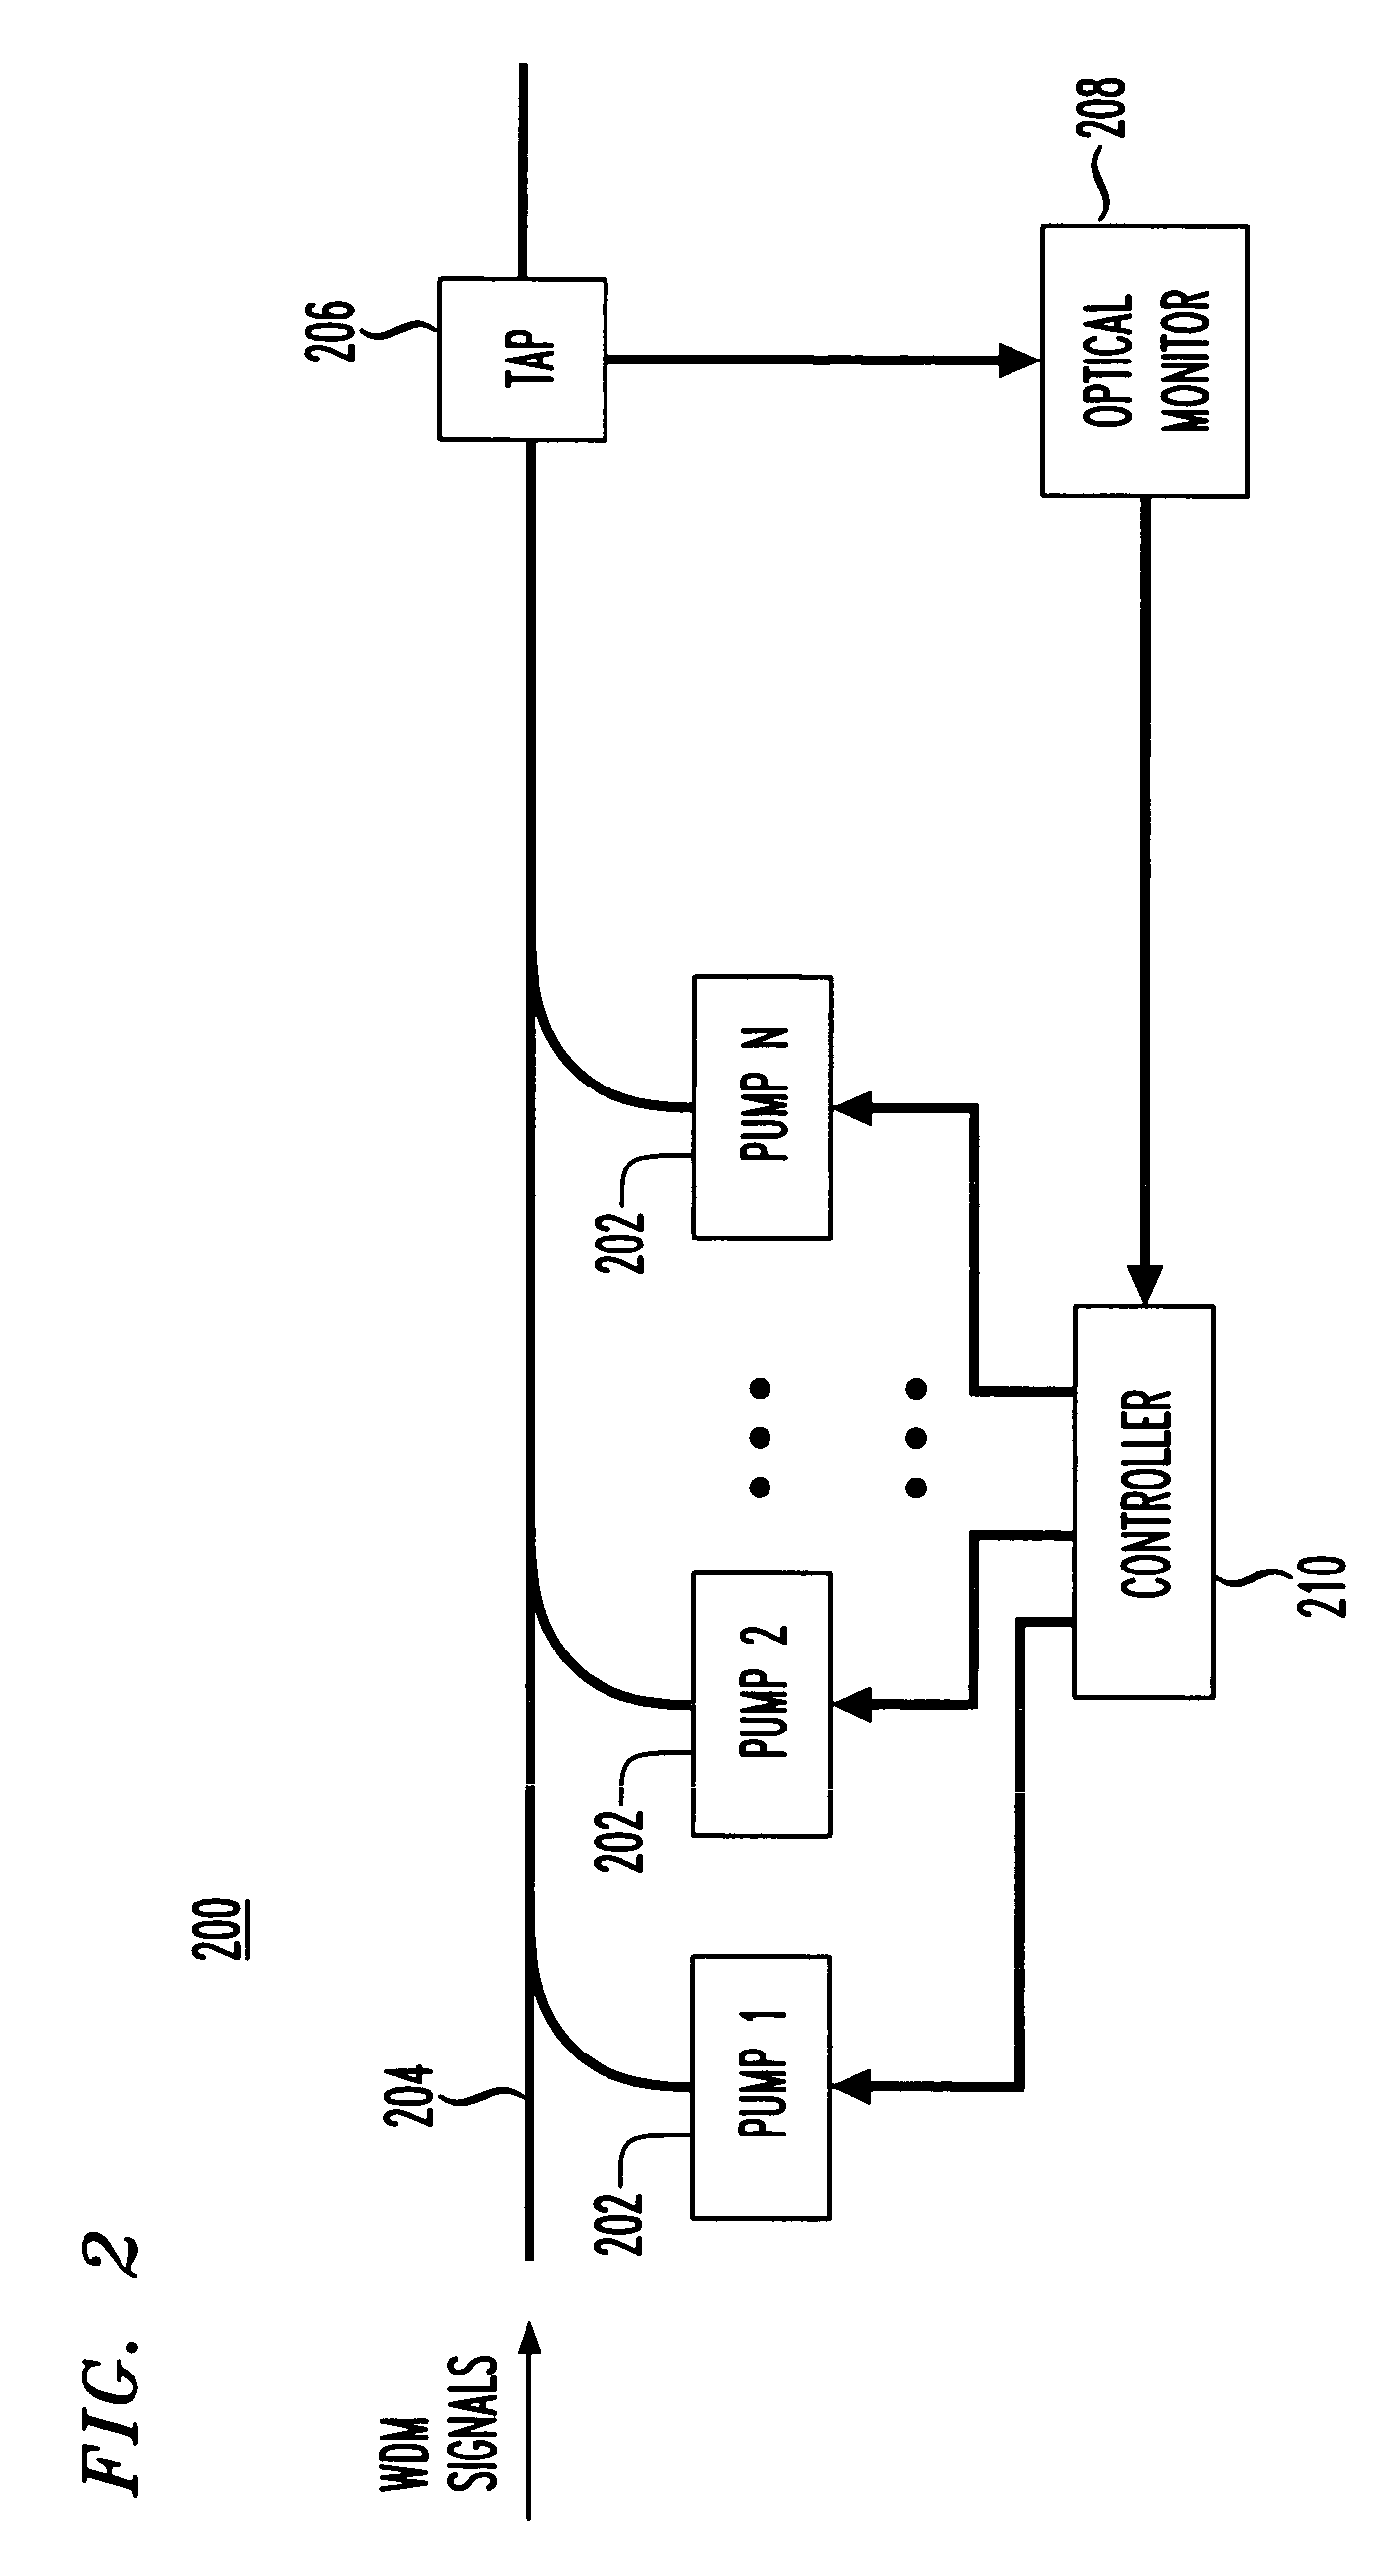 Transient control in optical transmission systems